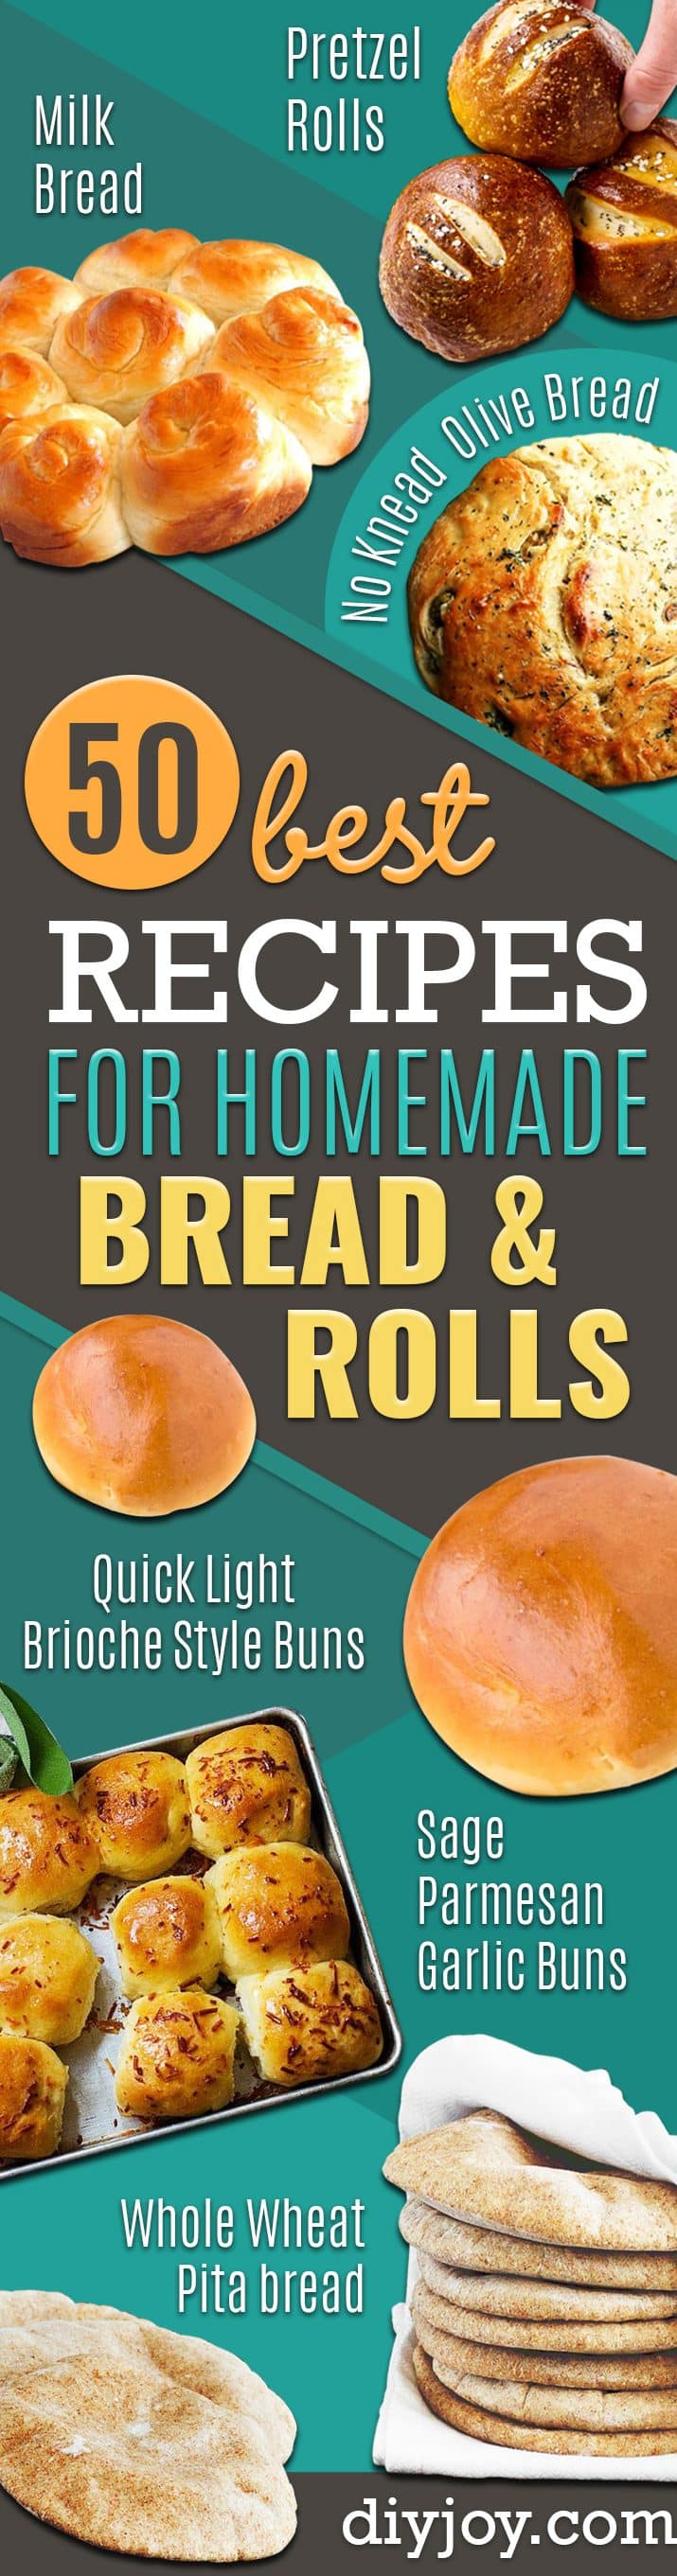 Homemade Bread Recipes - Quick Roll Recipes - Easy Dinner Rolls Recipe Ideas for Making Bread at Home - Sourdough, Milk, Crusty French Load, Pita, Pretzel and Brioche Buns - How to Make Homemade Rolls Easy